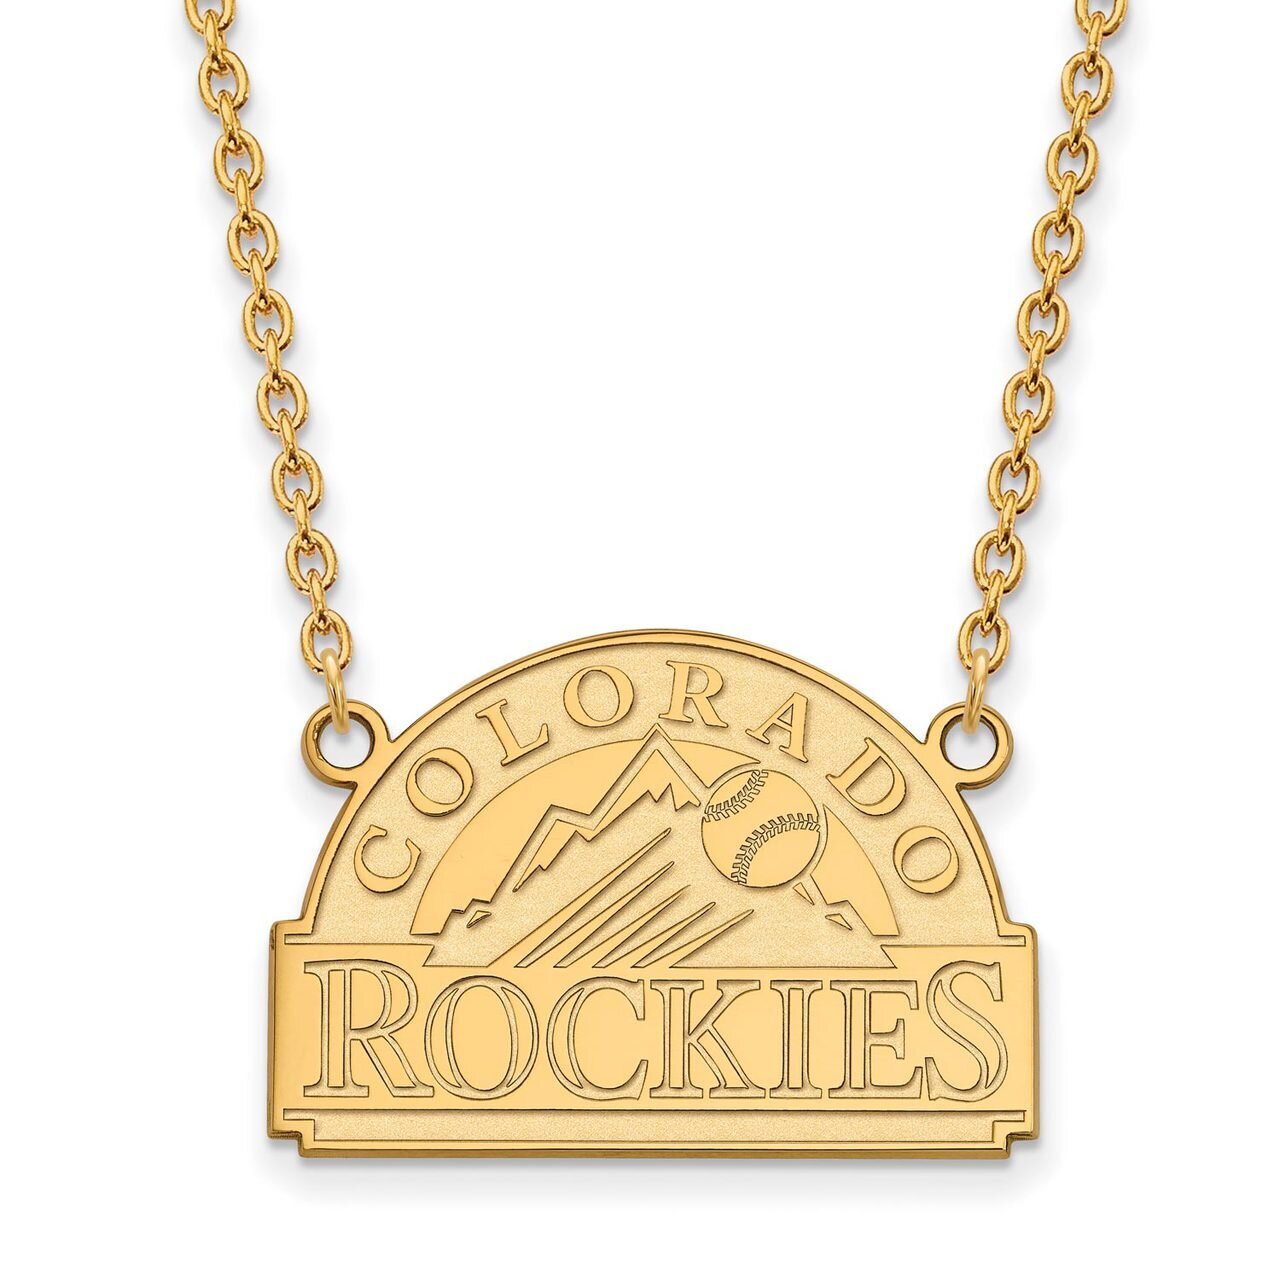 Colorado Rockies Large Pendant with Chain Necklace 10k Yellow Gold 1Y007ROK-18